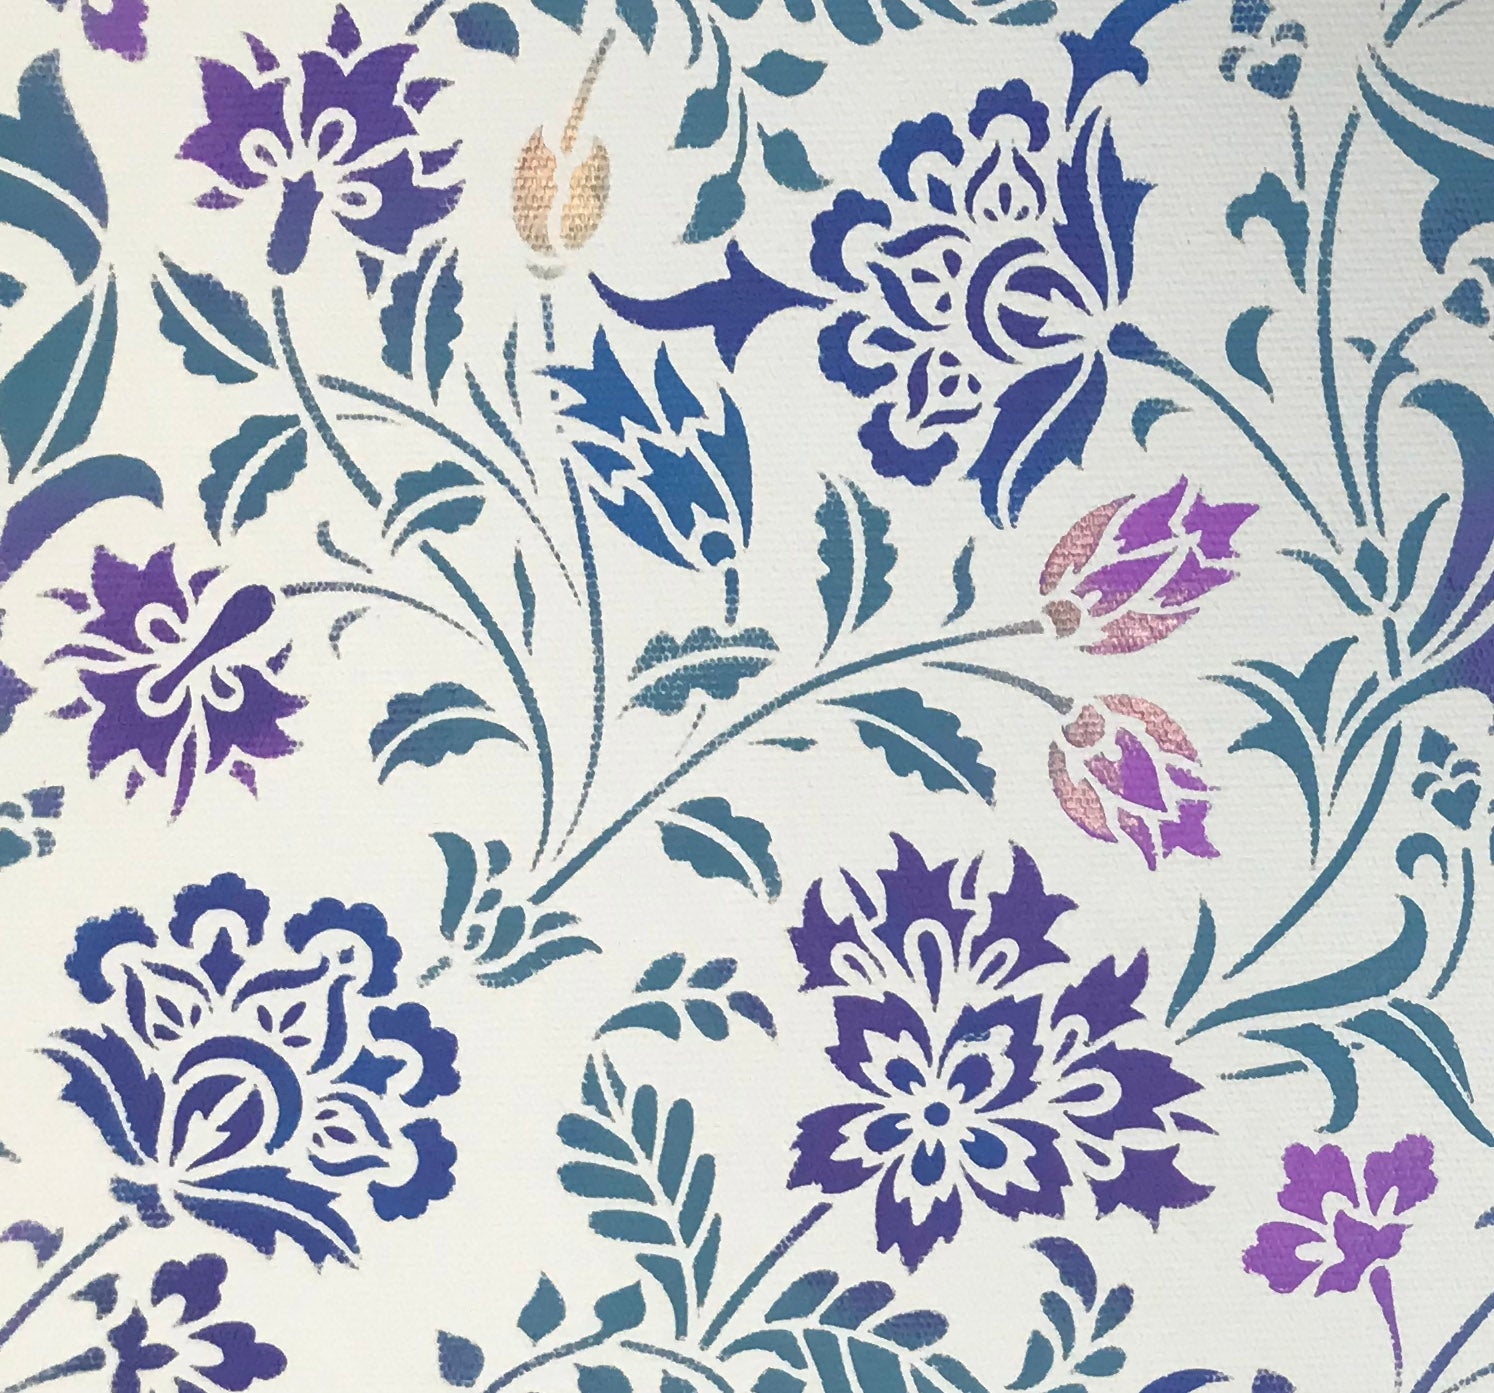 A single repeat of the floral pattern used for this floorcloth.